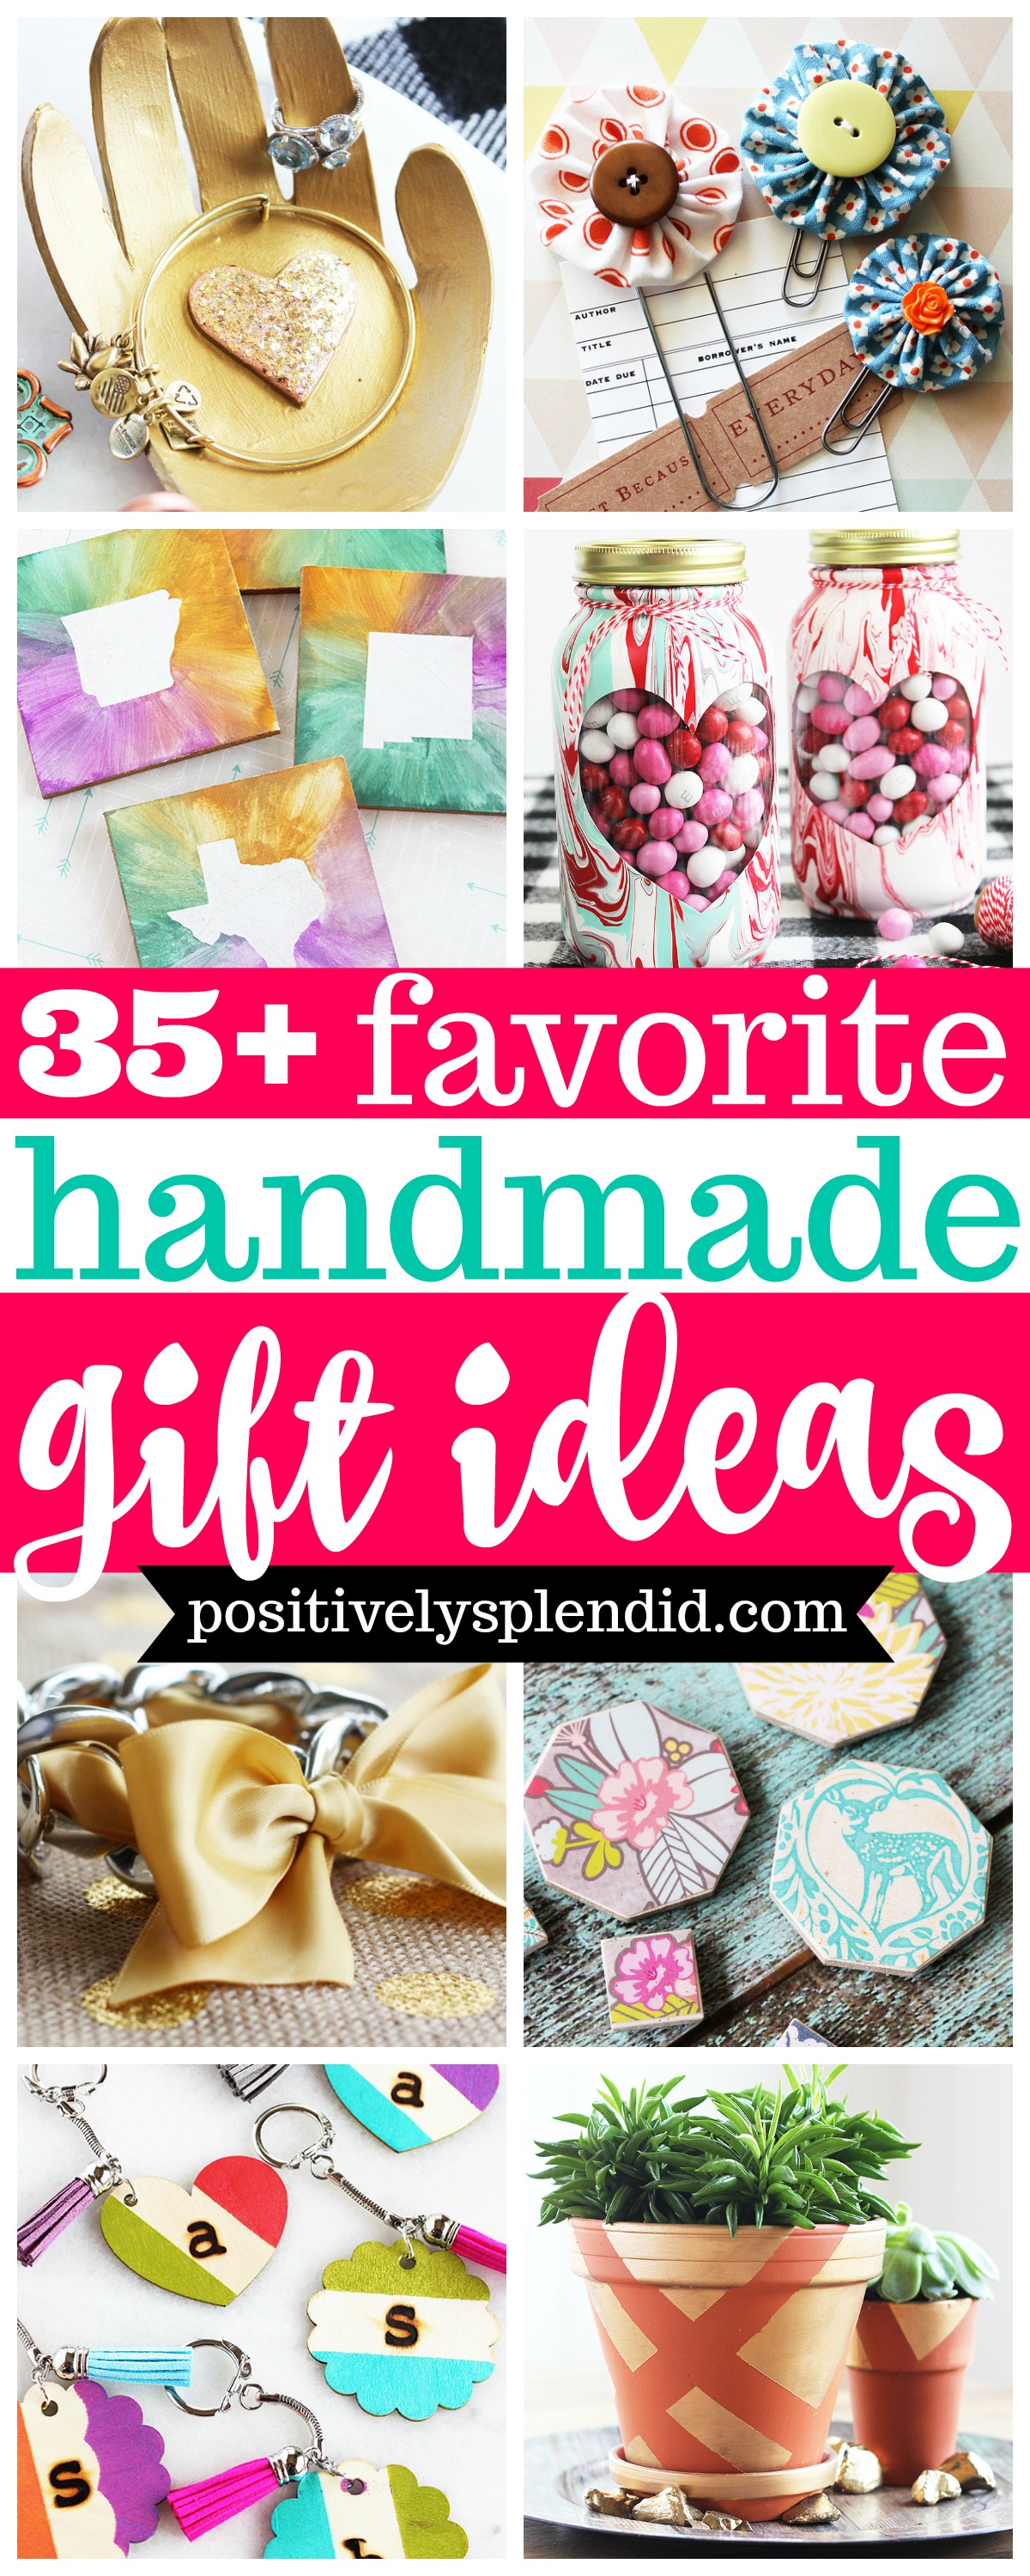 DIY Handmade gift ideas for the special ladies in your life